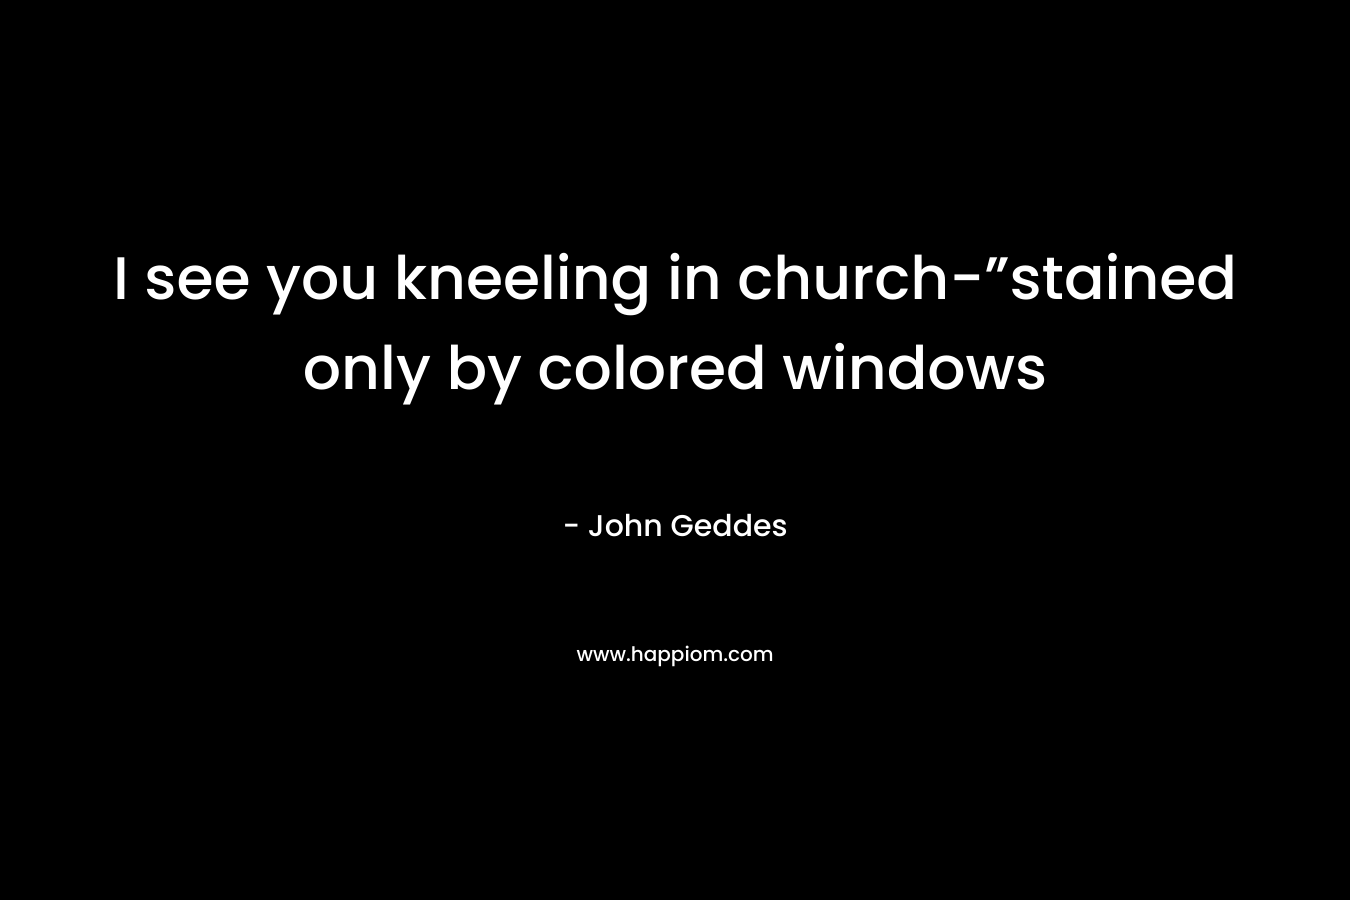 I see you kneeling in church-”stained only by colored windows